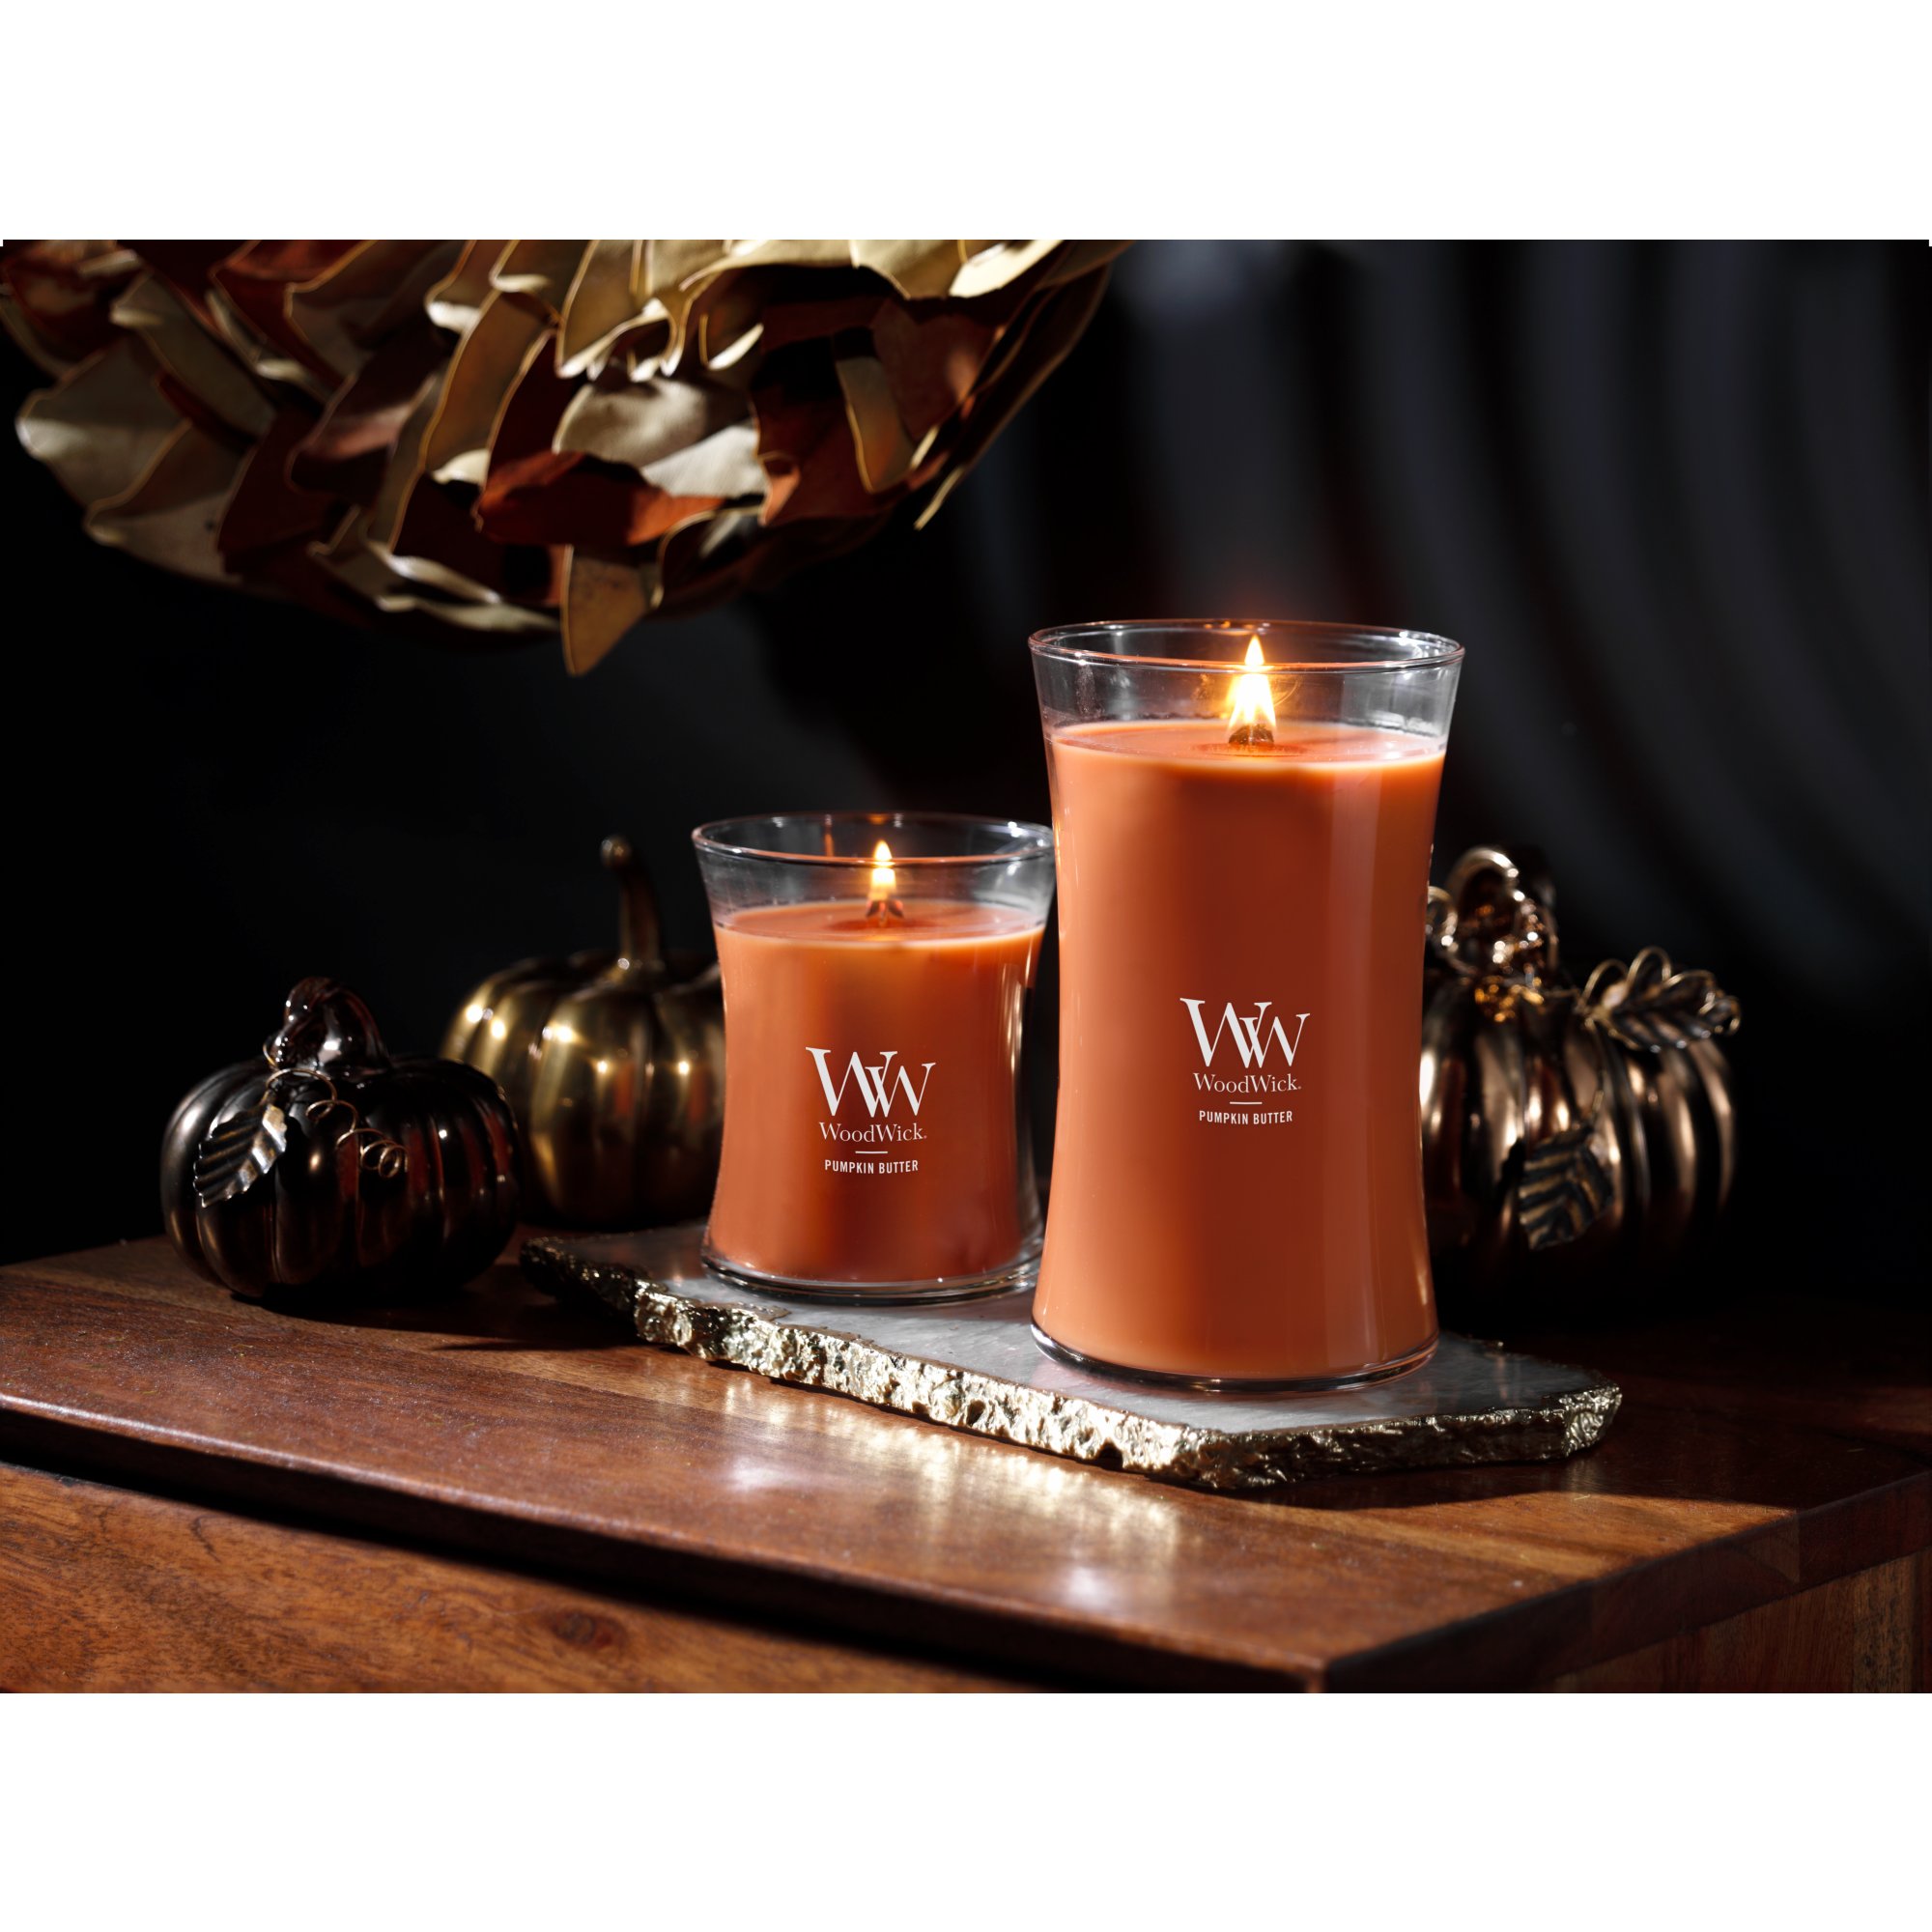 Pumpkin Butter WoodWick® Large Hourglass Candle - Large Hourglass Candles